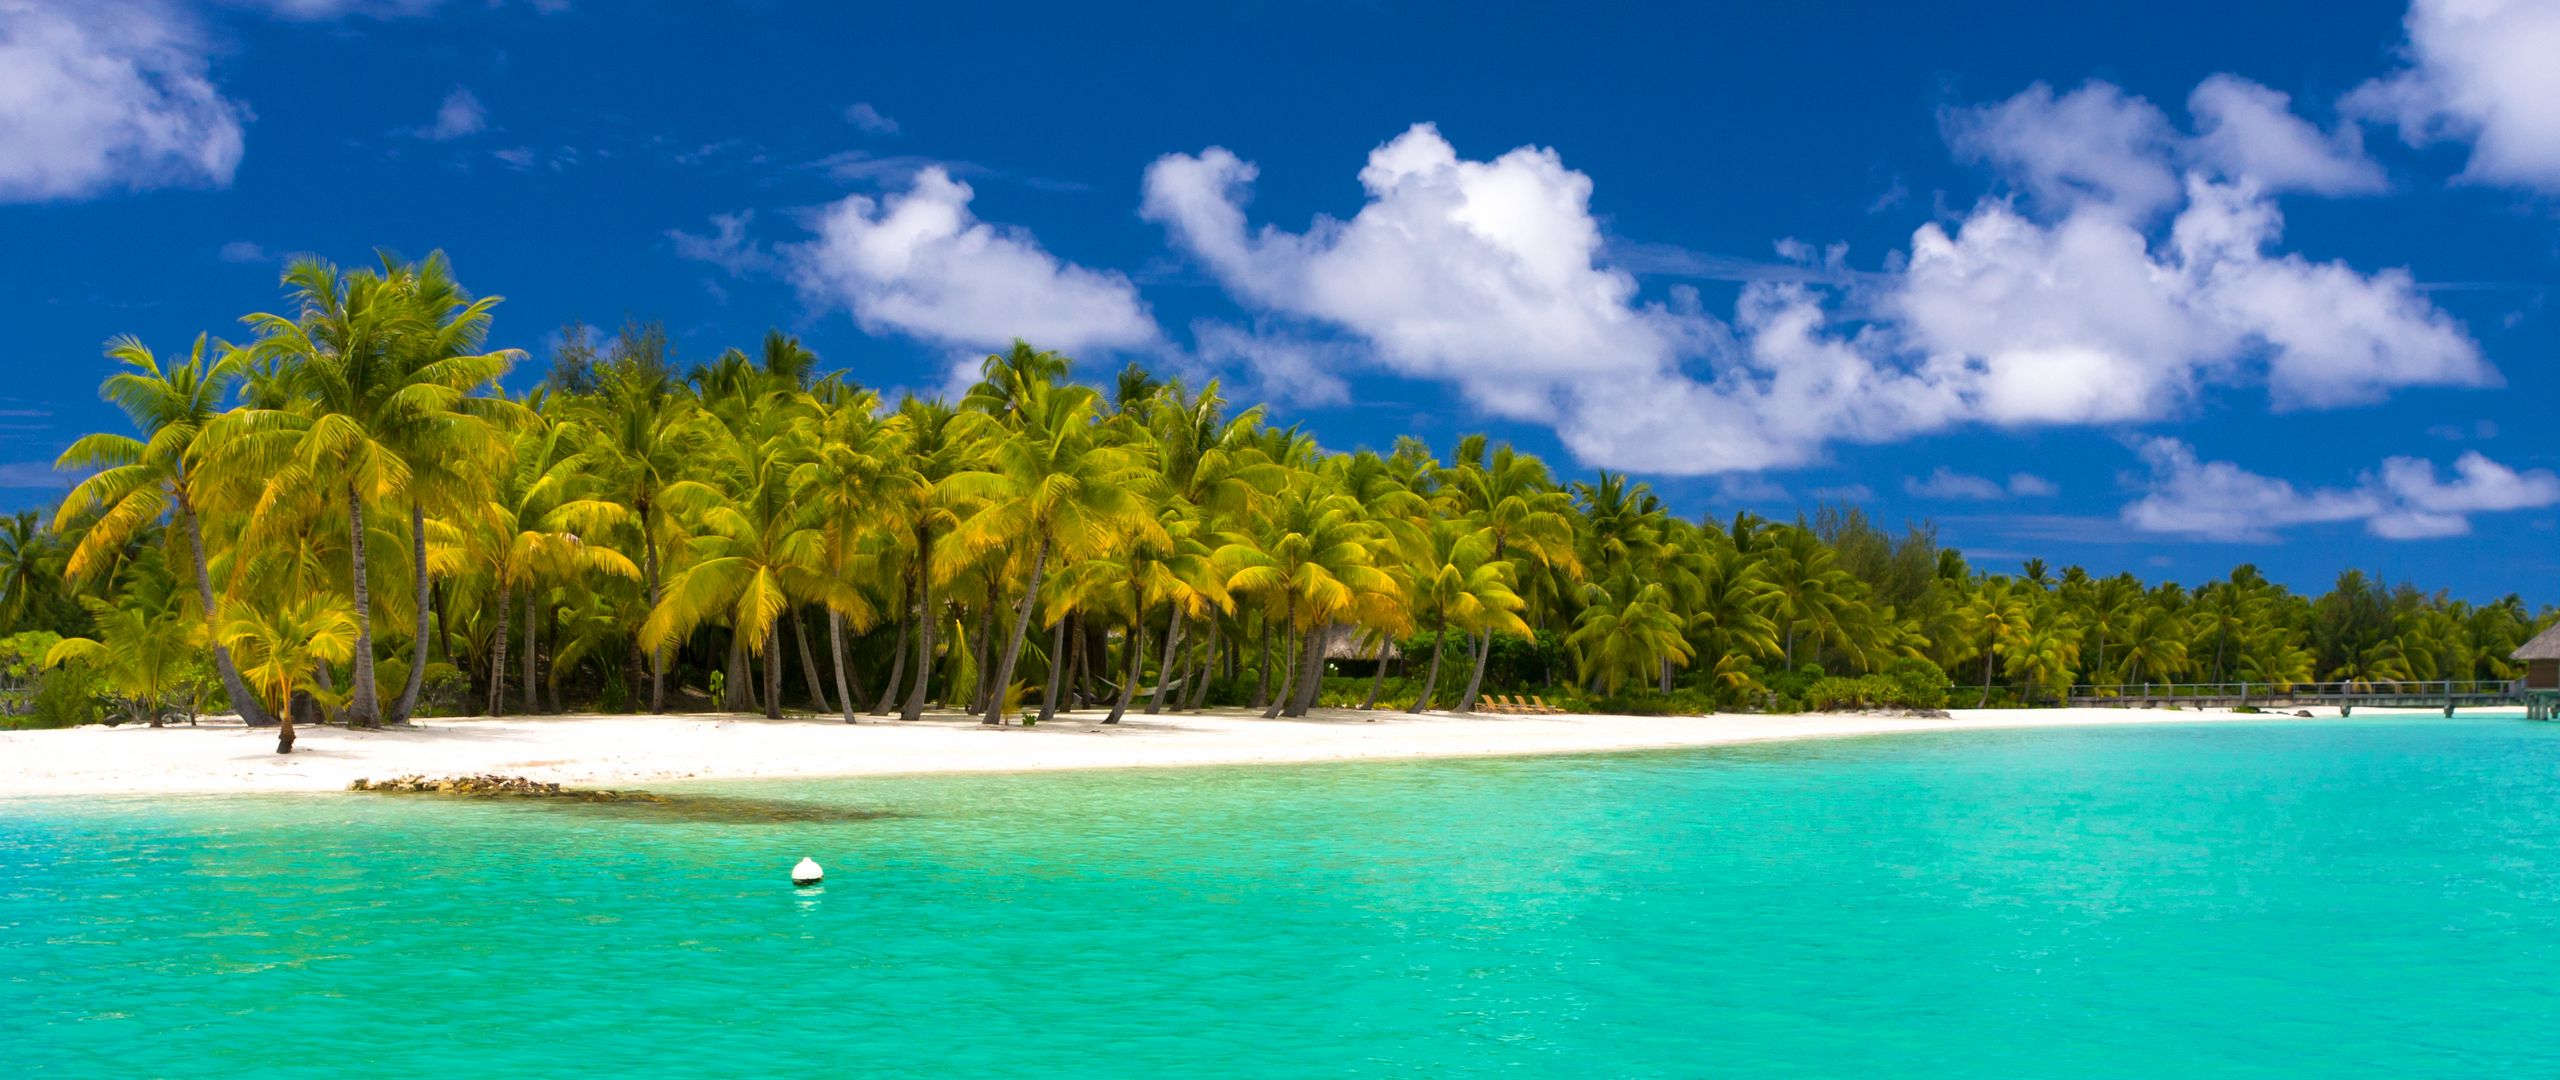 Download wallpaper 2560x1080 summer, maldives, tropical, beach, palm trees dual wide 1080p HD background